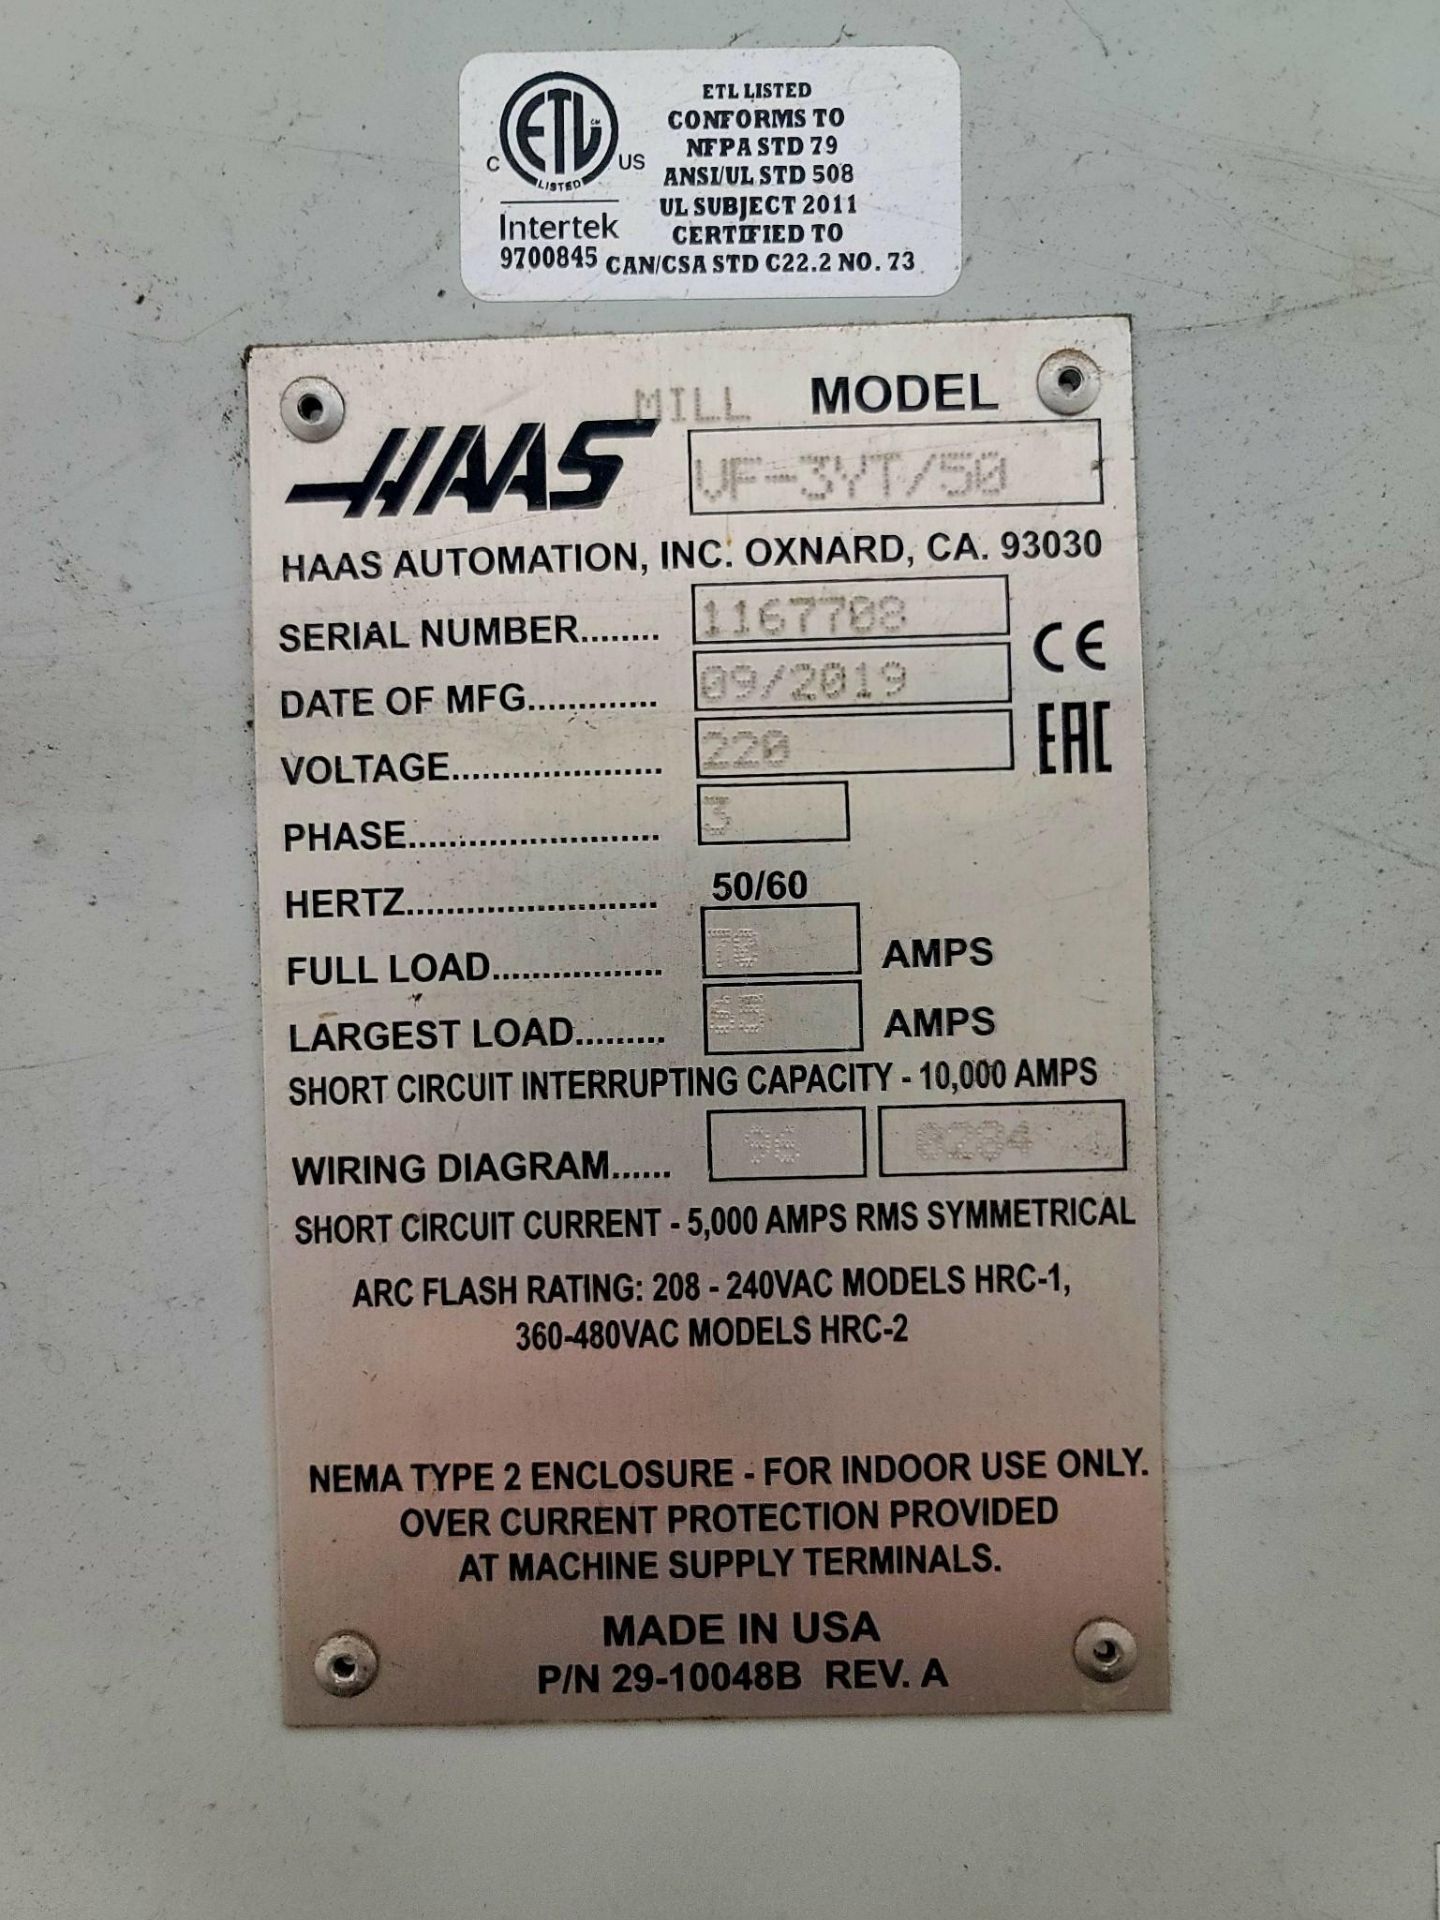 2019, Haas VF 3YT/ 50 Vertical Machining Center, VMC, S/N 1167708 - Image 42 of 42